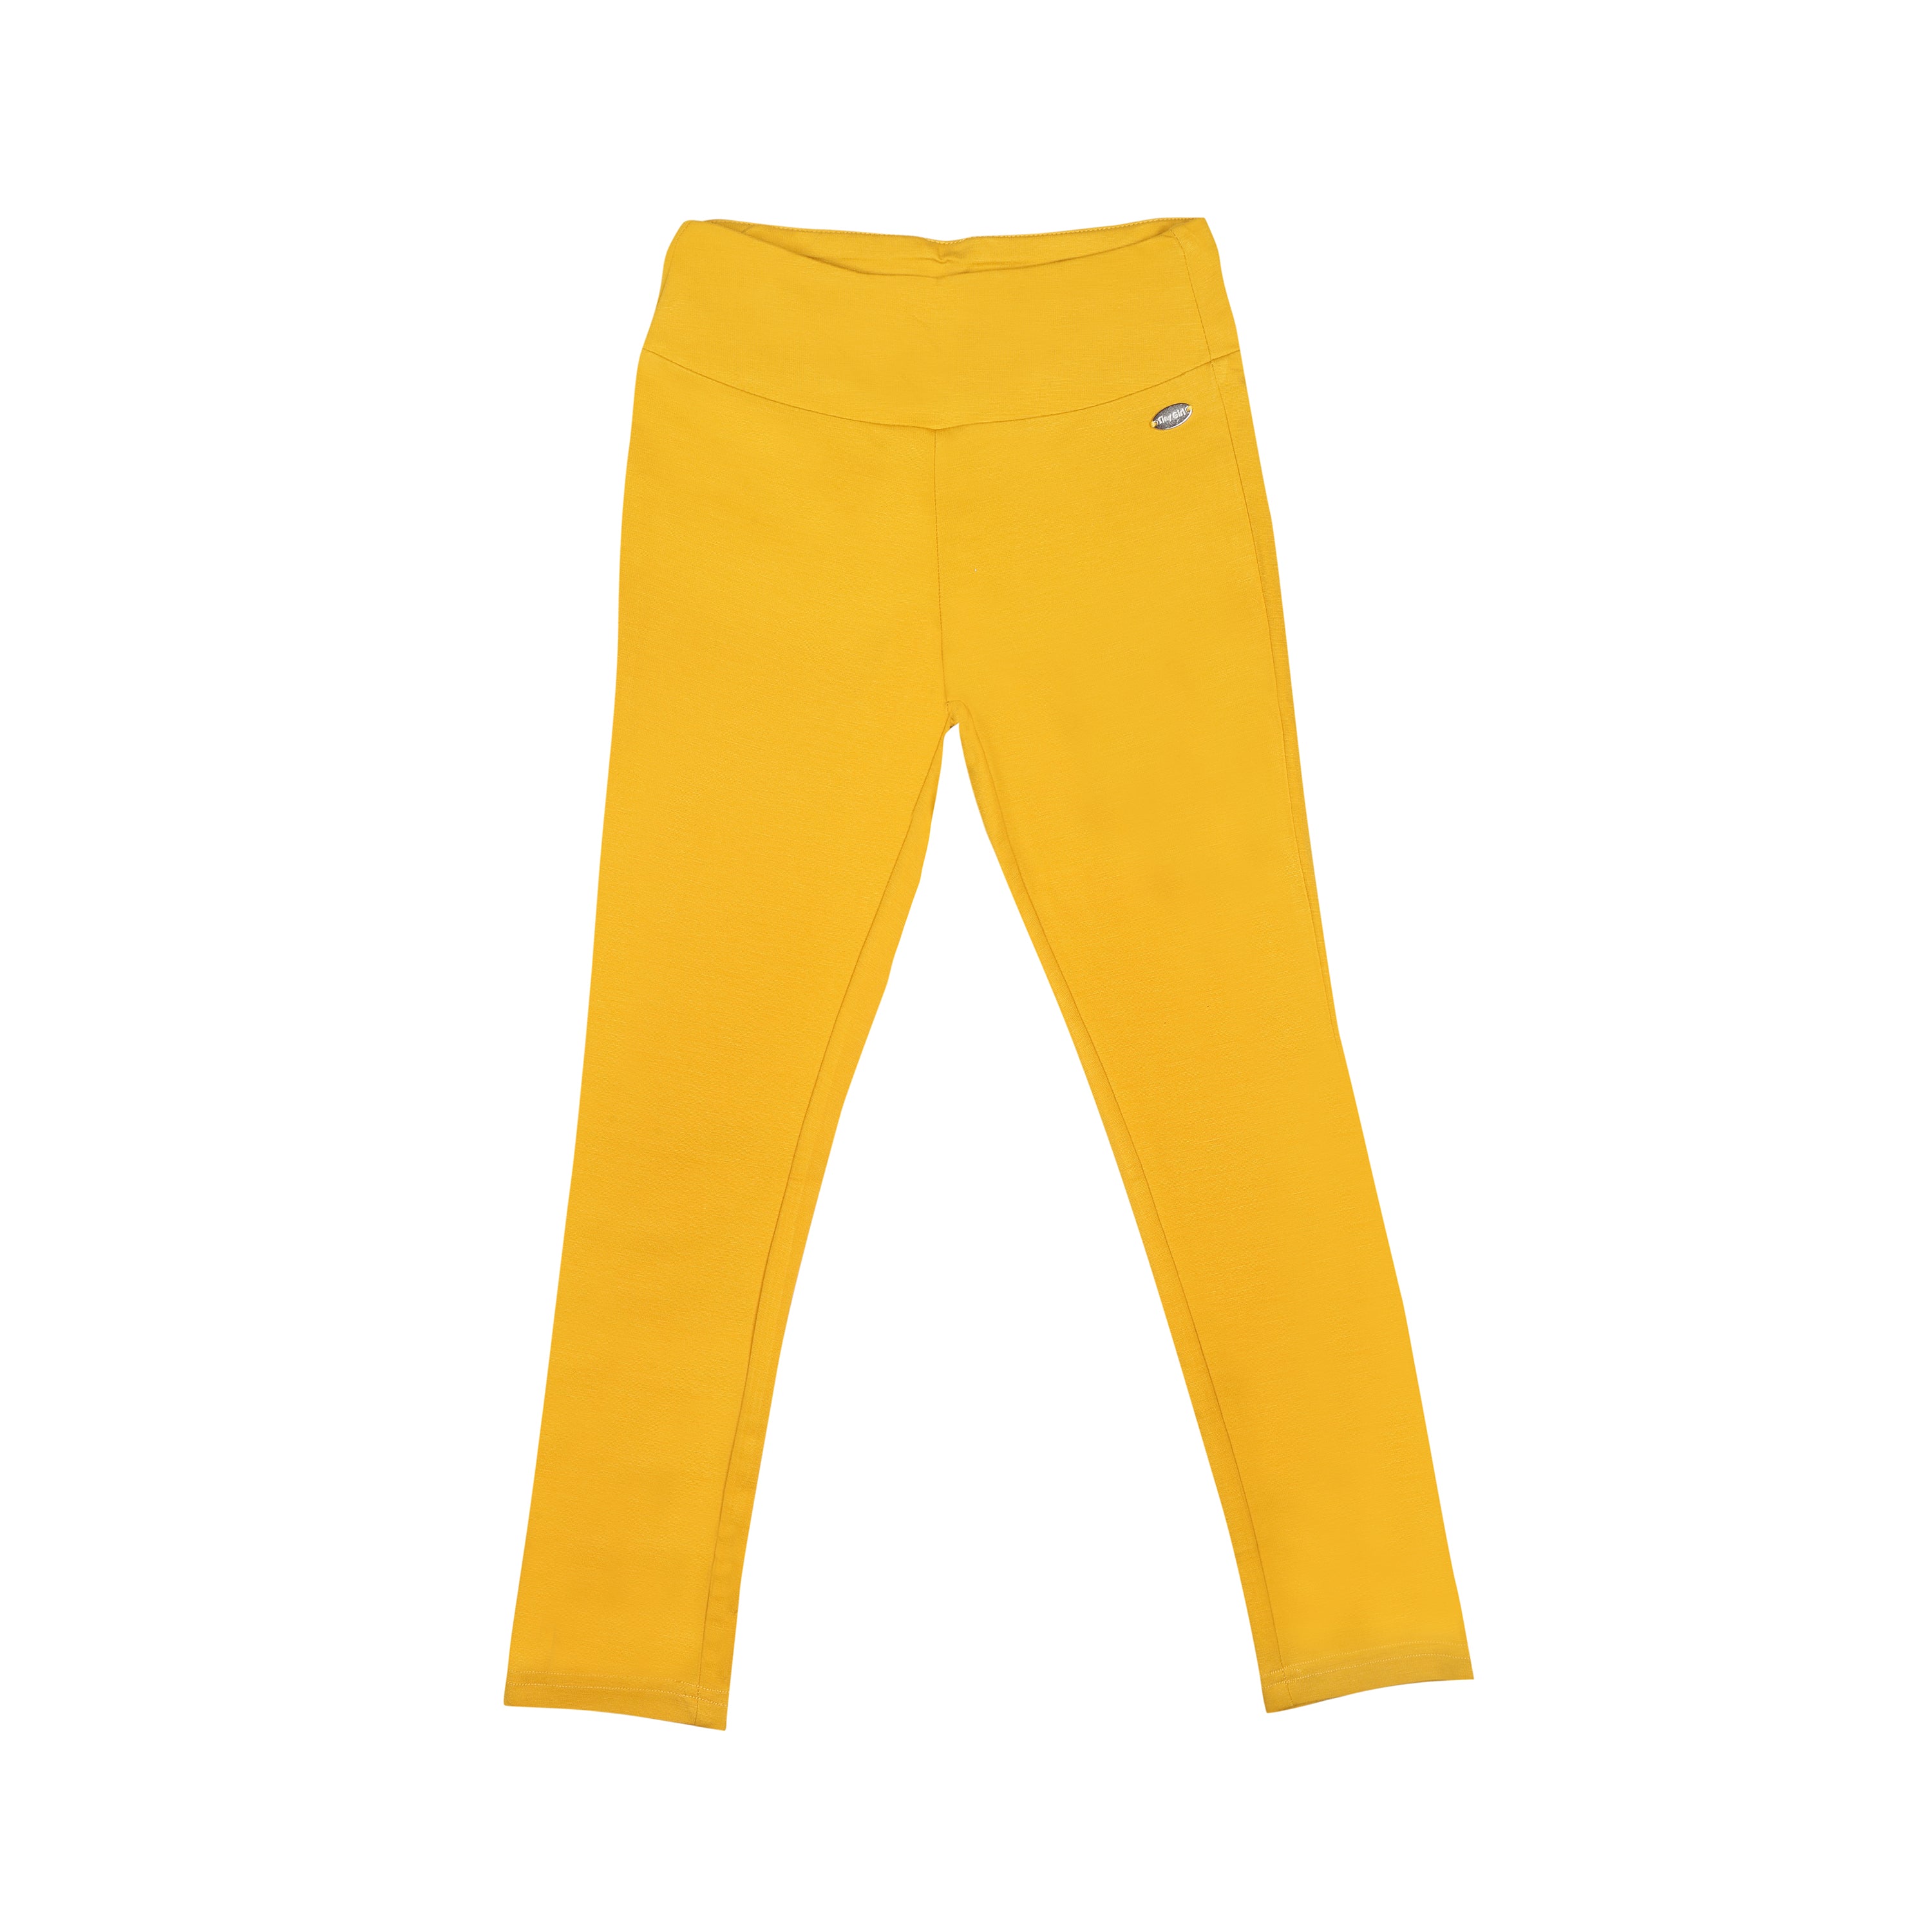 Kids Cave - Yellow Cotton Blend Girls Leggings ( Pack of 1 ) - Buy Kids  Cave - Yellow Cotton Blend Girls Leggings ( Pack of 1 ) Online at Low Price  - Snapdeal